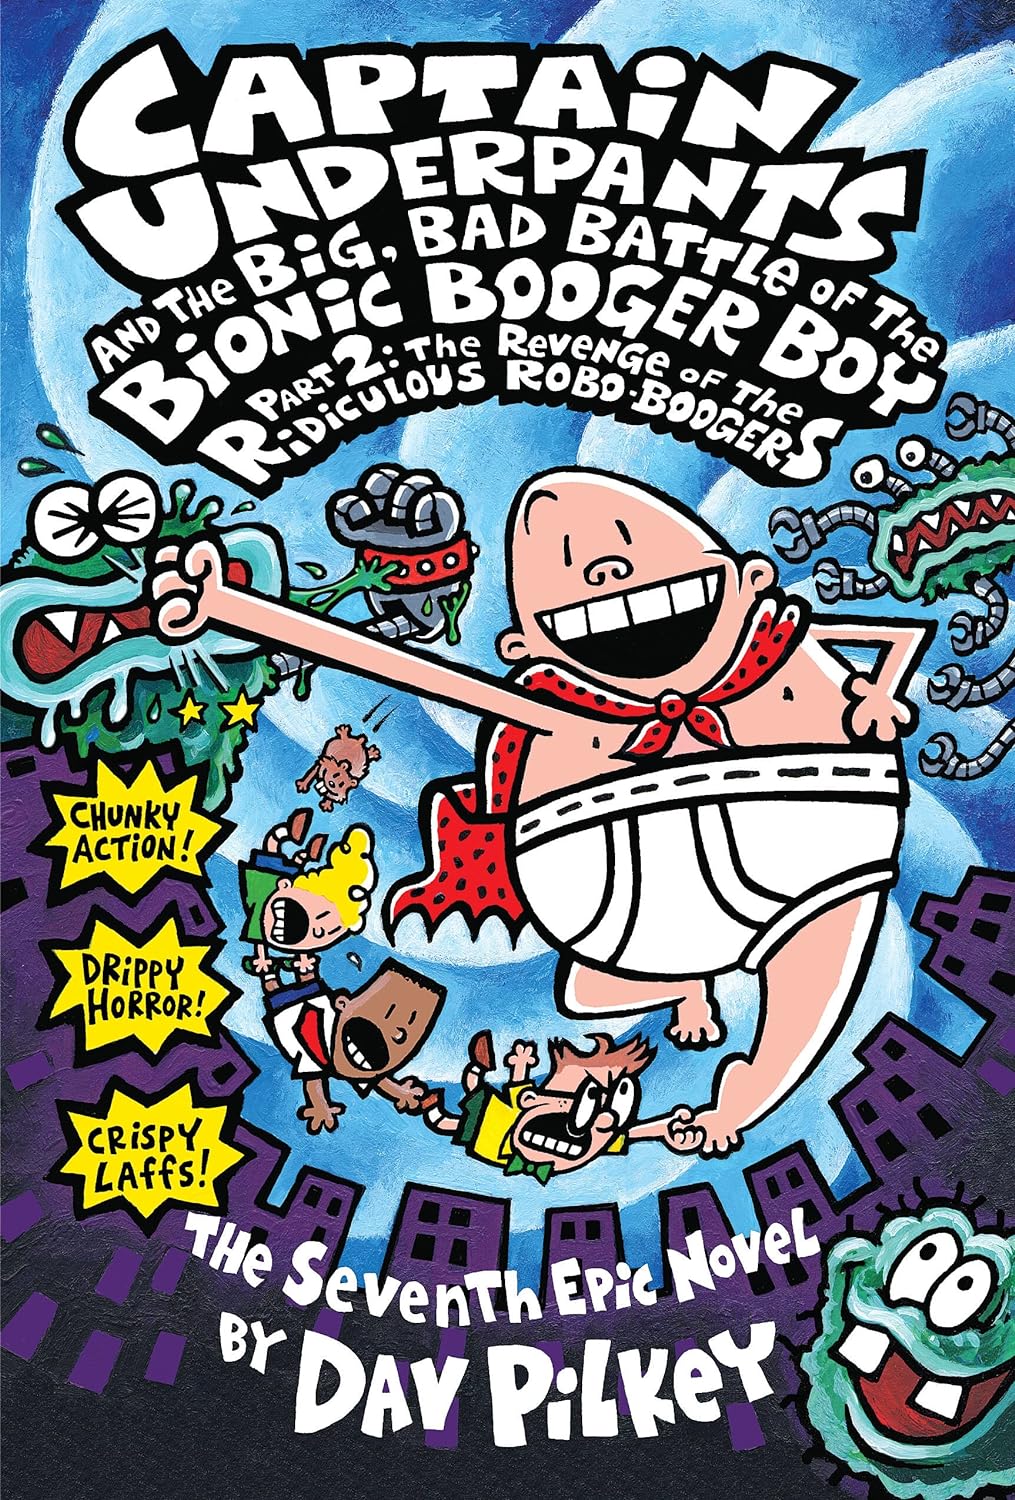 Captain Underpants and the Big, Bad, Battle of the Bionic Booger Boy, Part 2 Hardcover – October 1, 2003